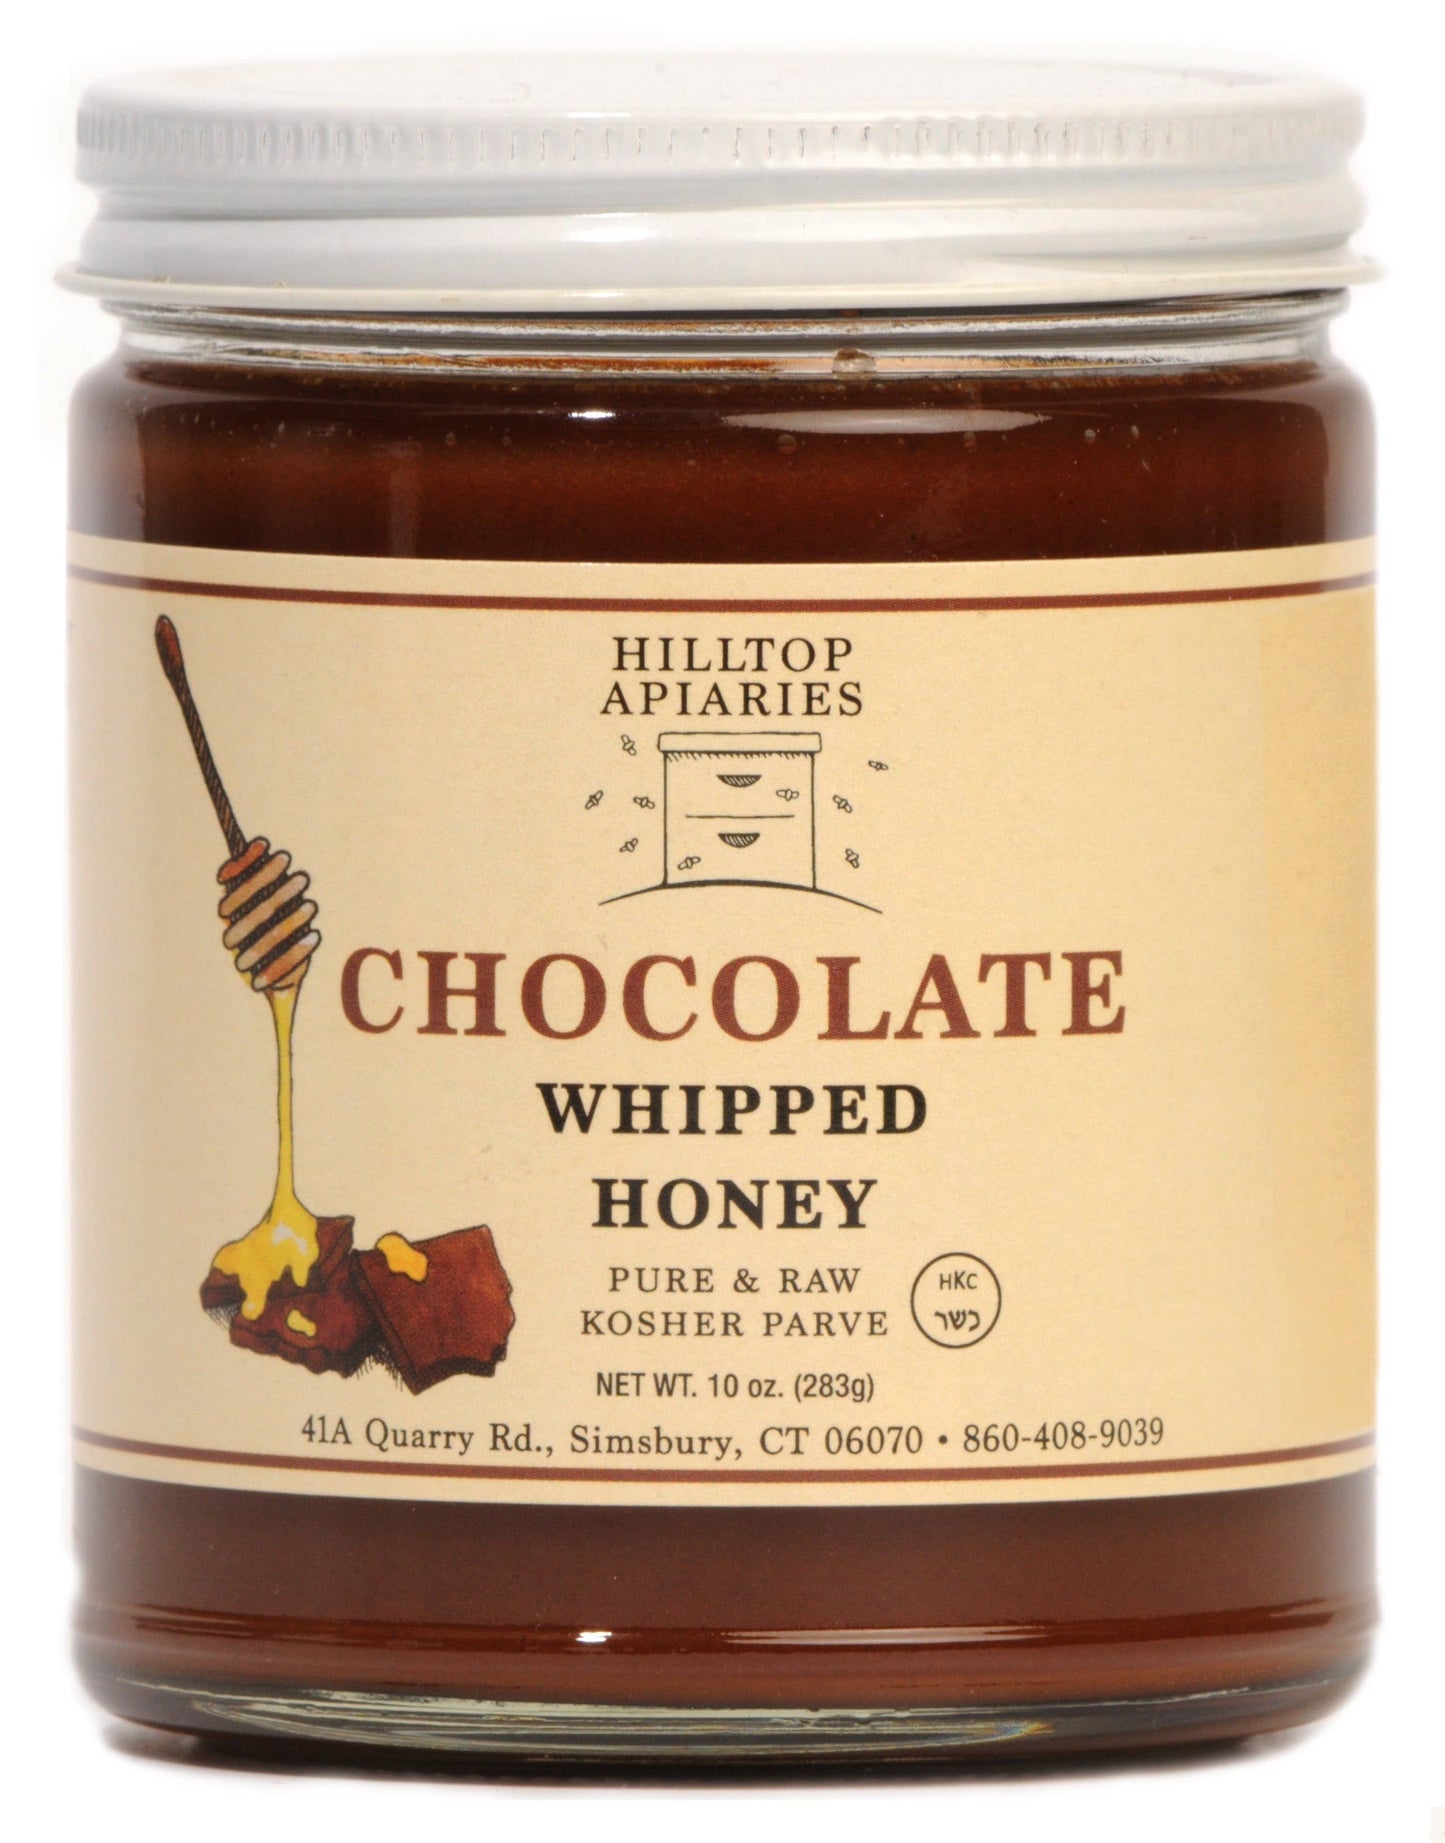 Chocolate Whipped Honey Spread